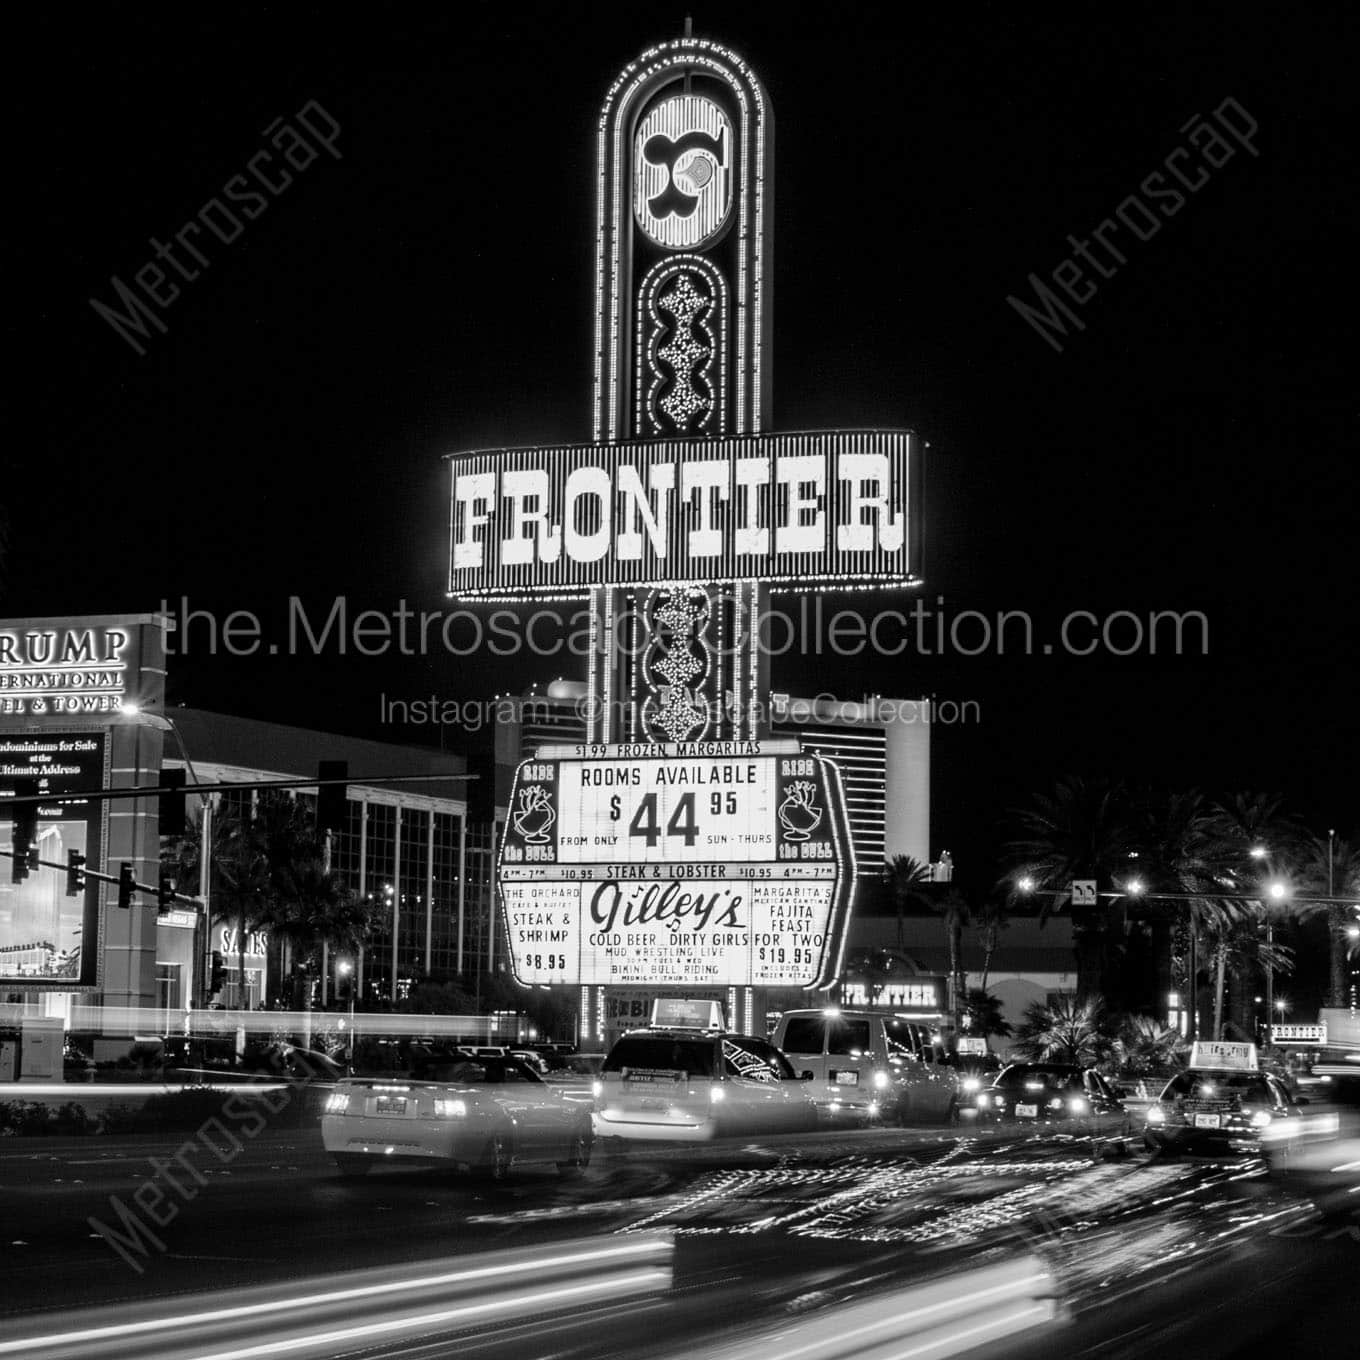 frontier casino sign at night Black & White Office Art